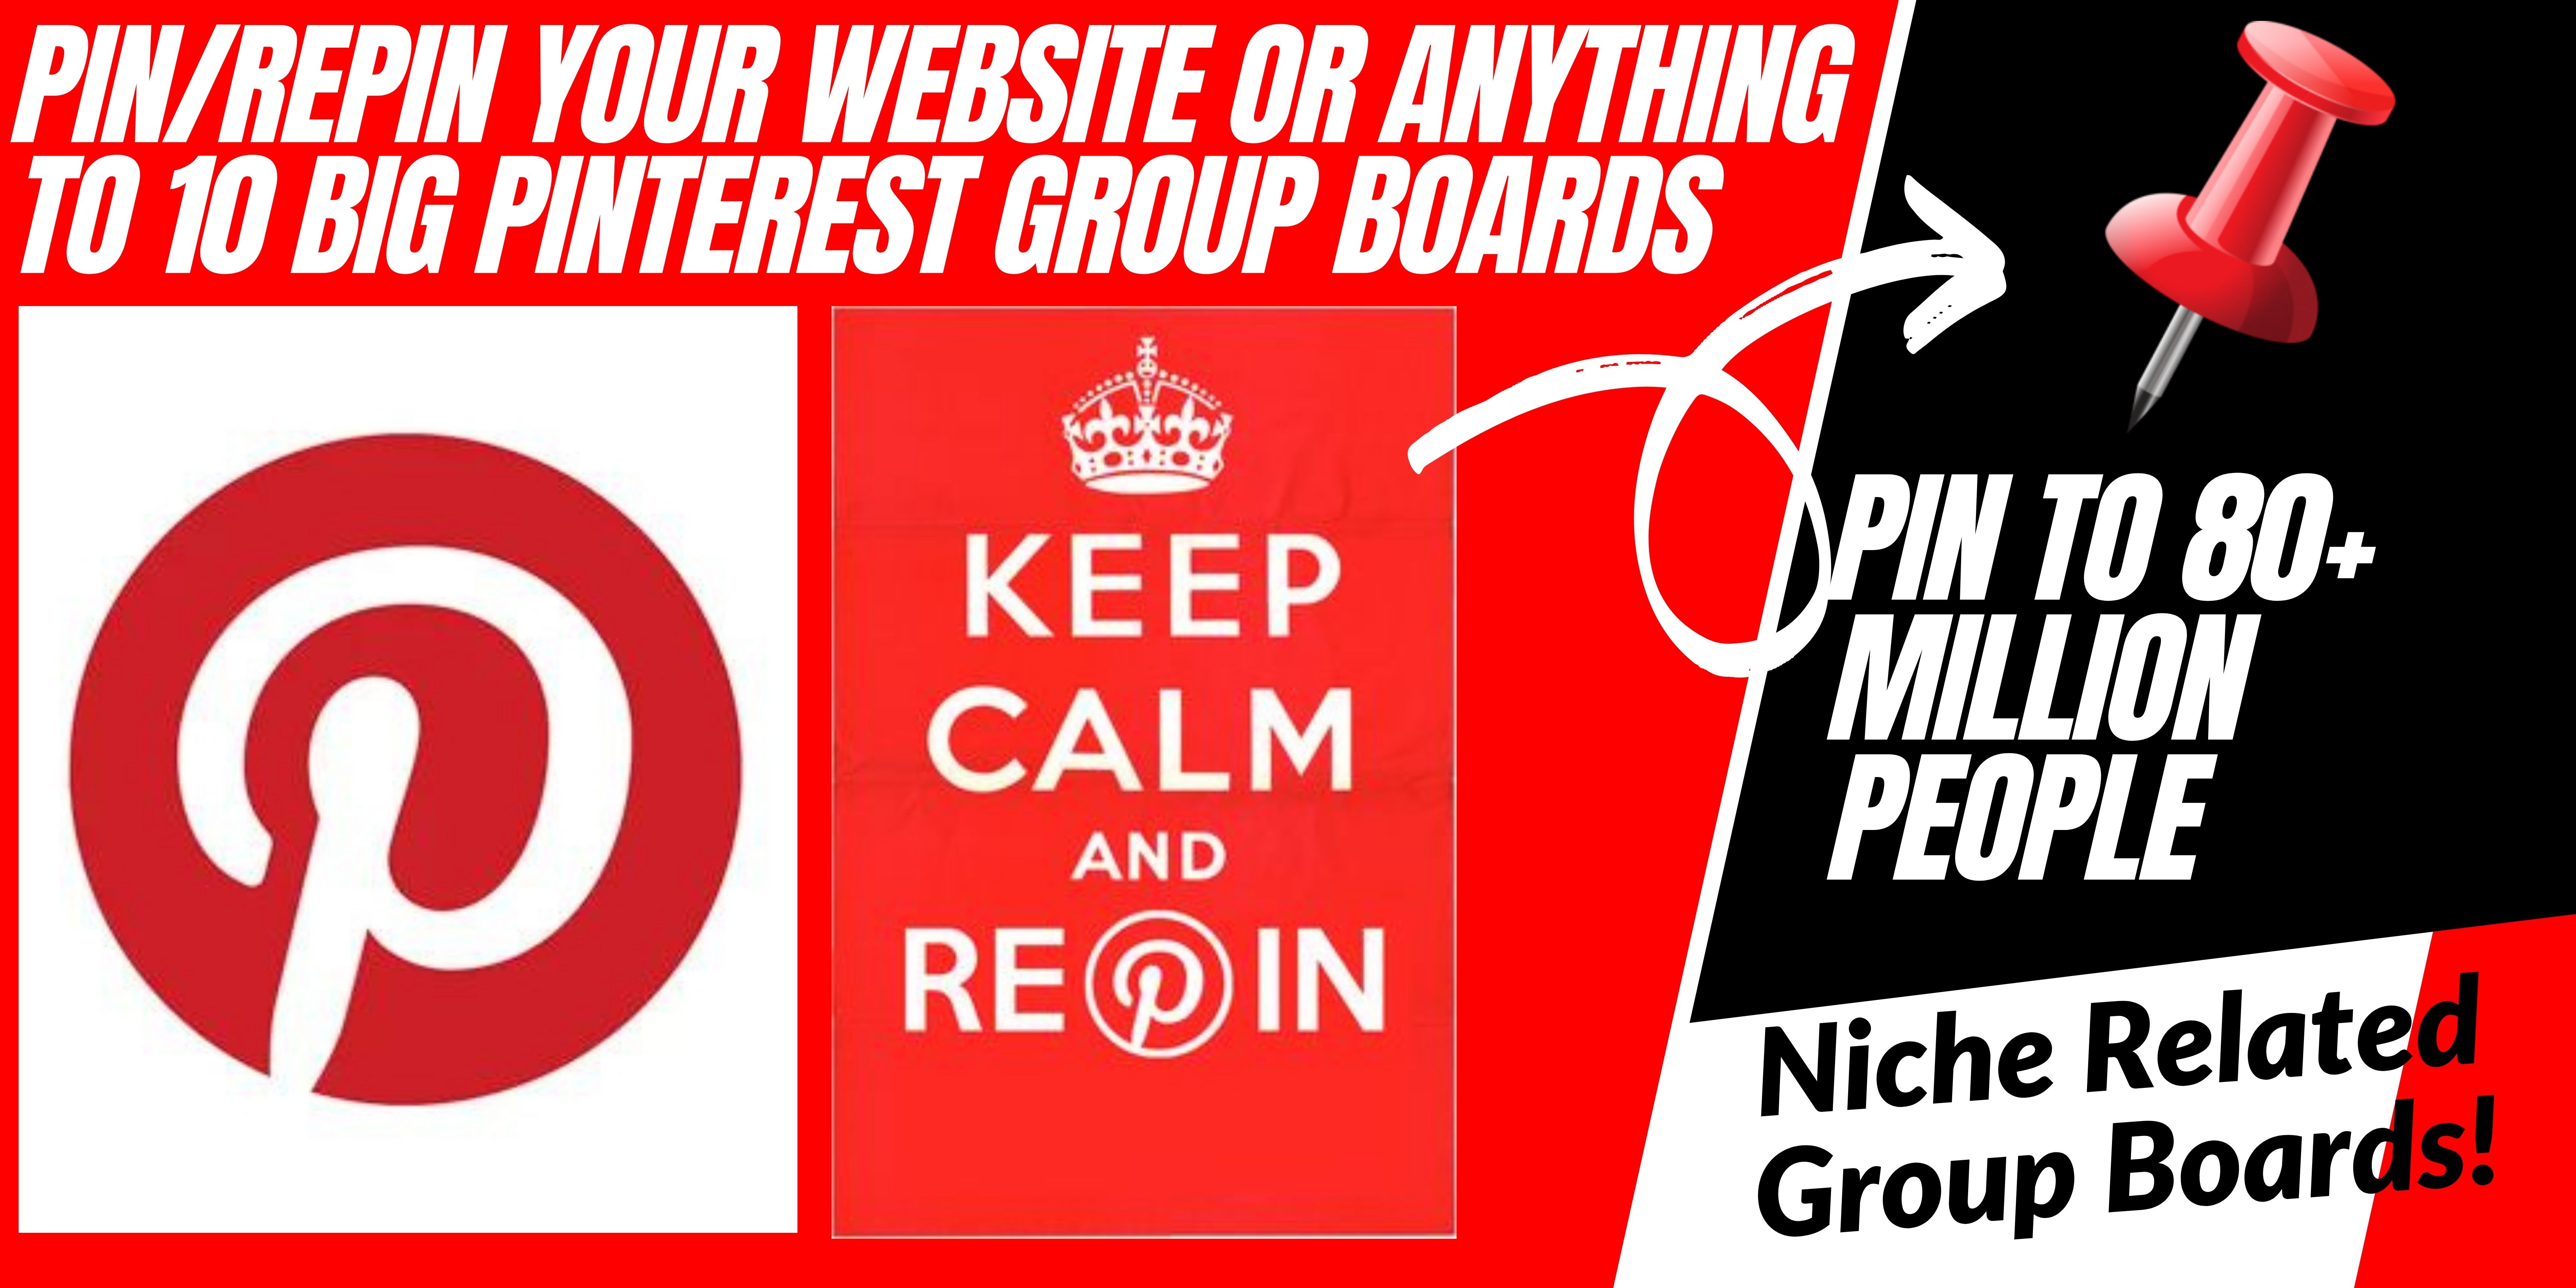 Pin/Repin Your Website or Anything to 10 Big Pinterest Group Boards